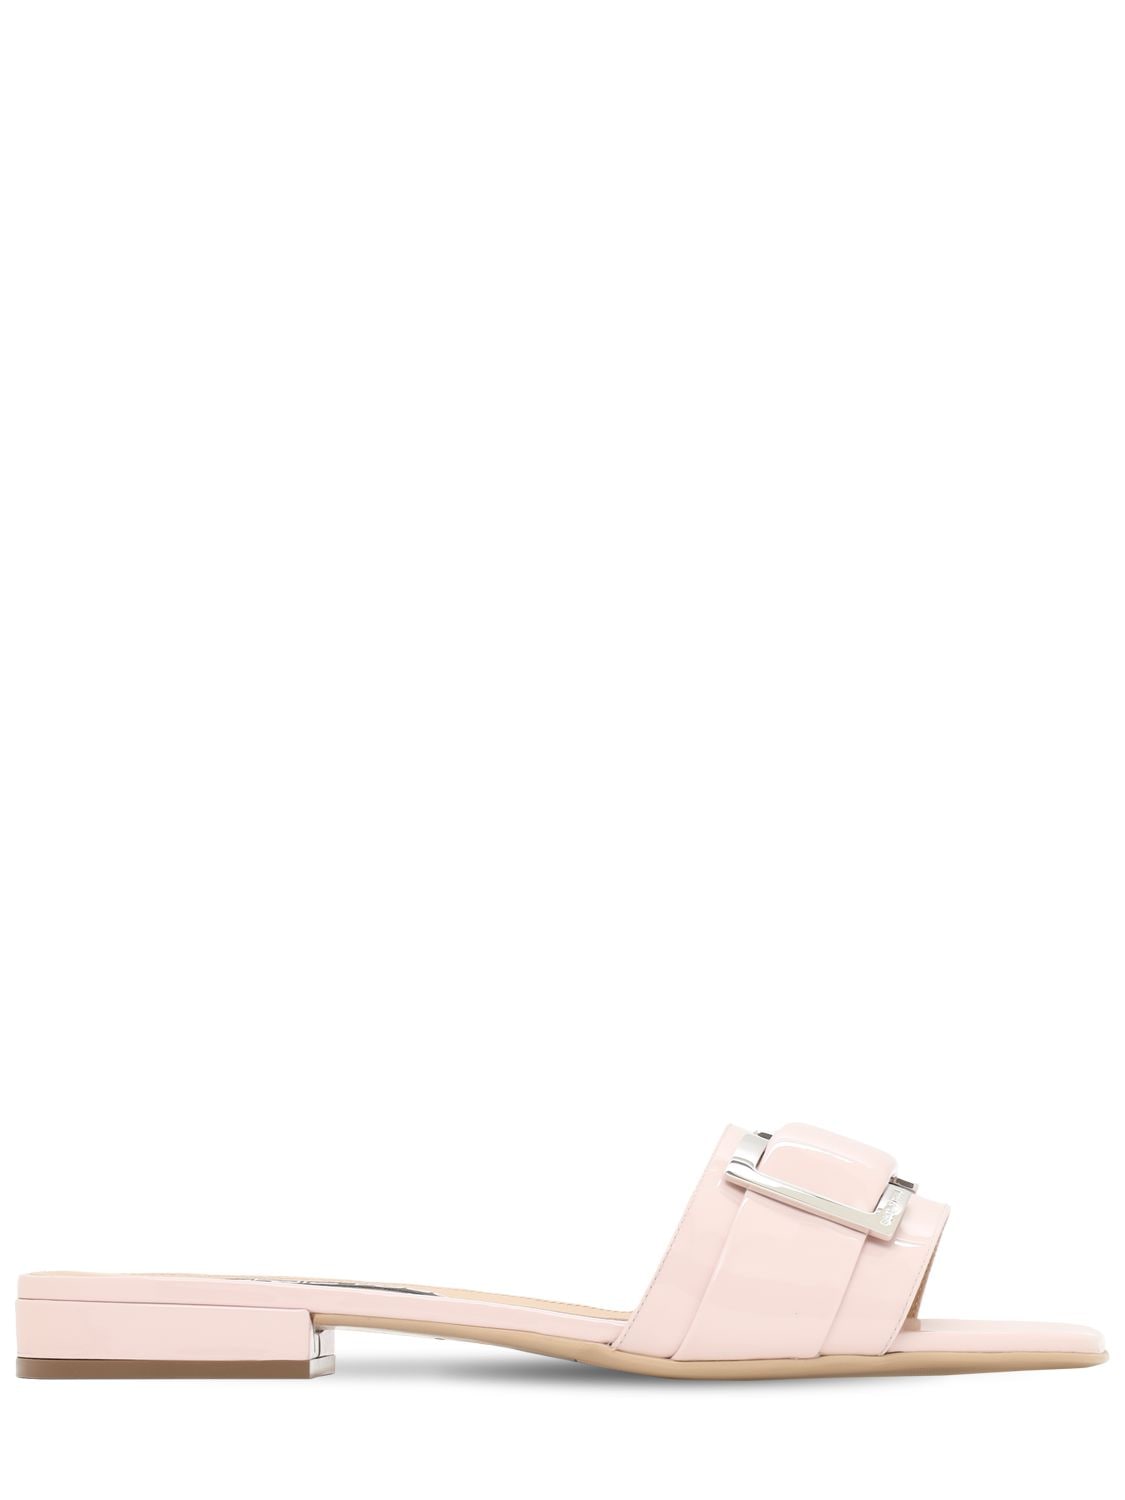 Sergio Rossi 15mm Sr Prince Patent Leather Slides In Pink